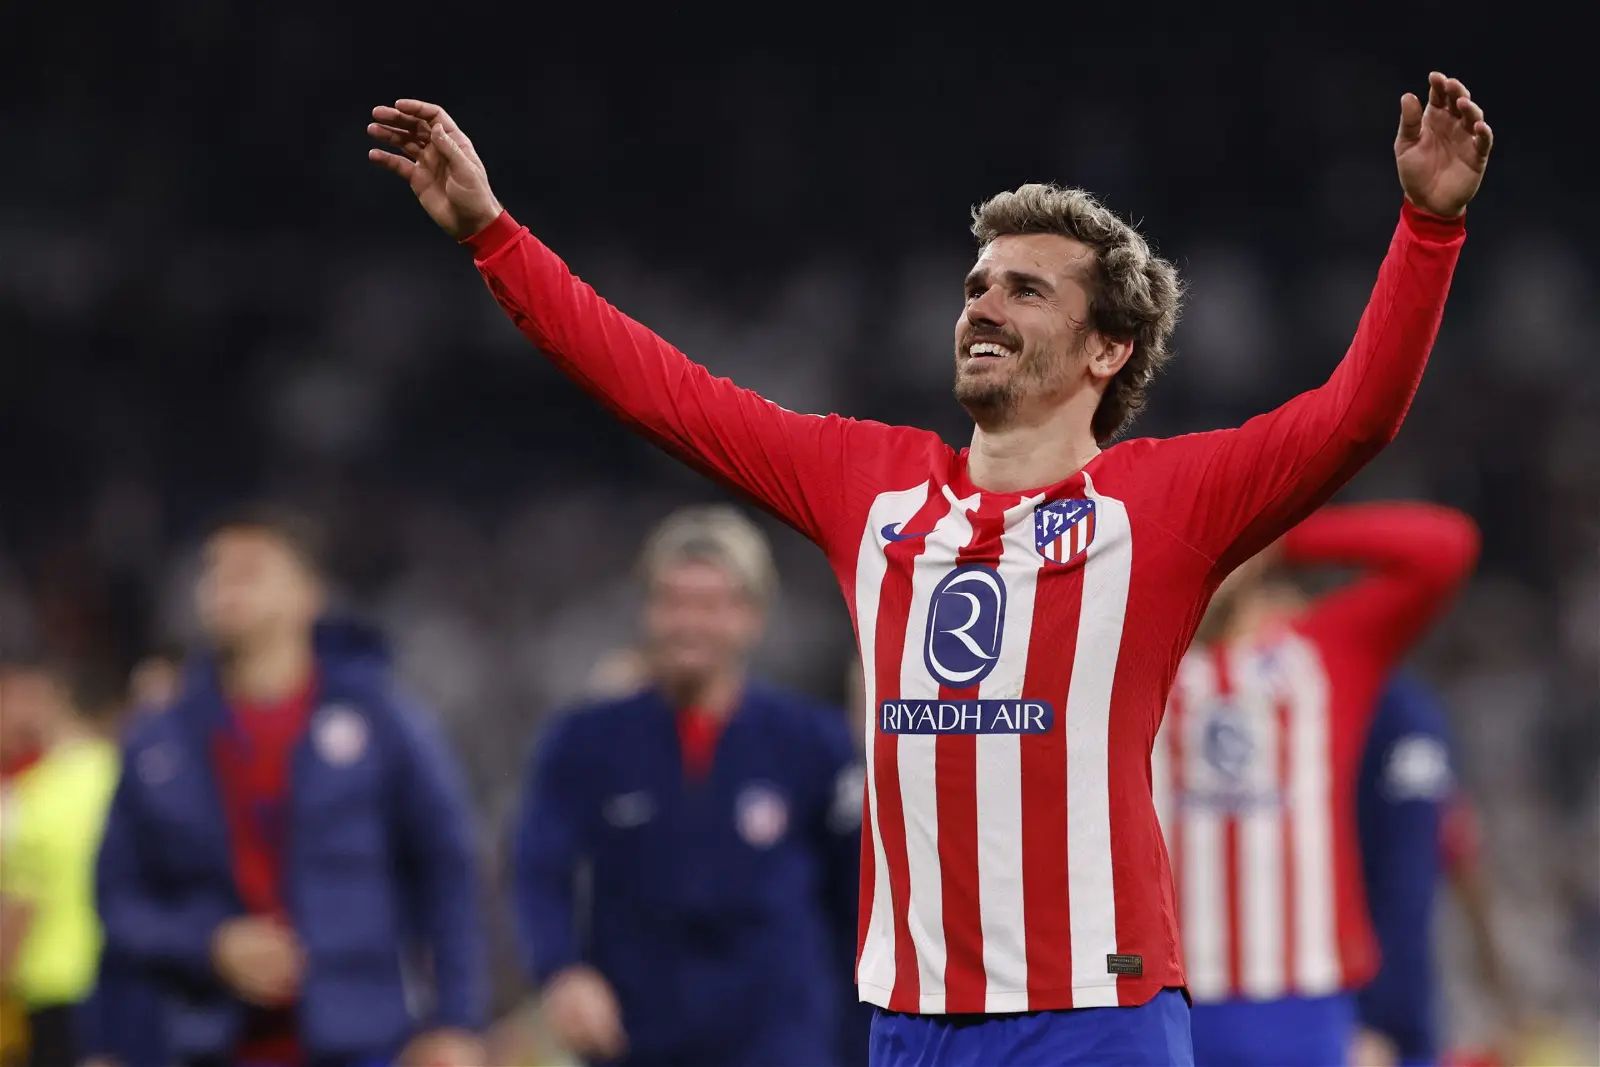 Premier League, MLS clubs interested in signing €15m-rated Antoine Griezmann from Atletico Madrid